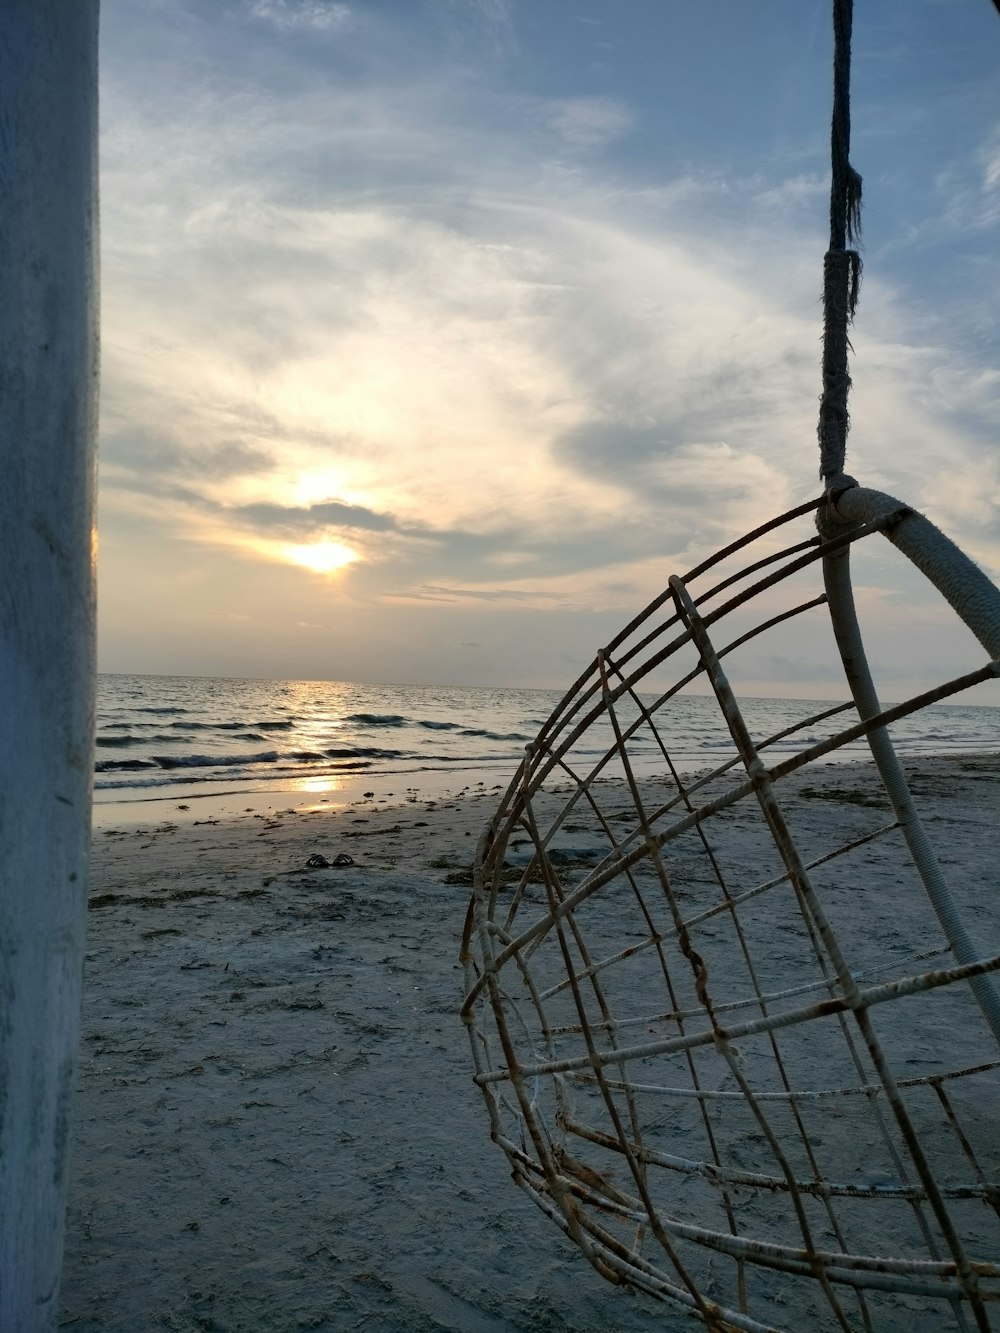 the sun is setting on the beach with a swing